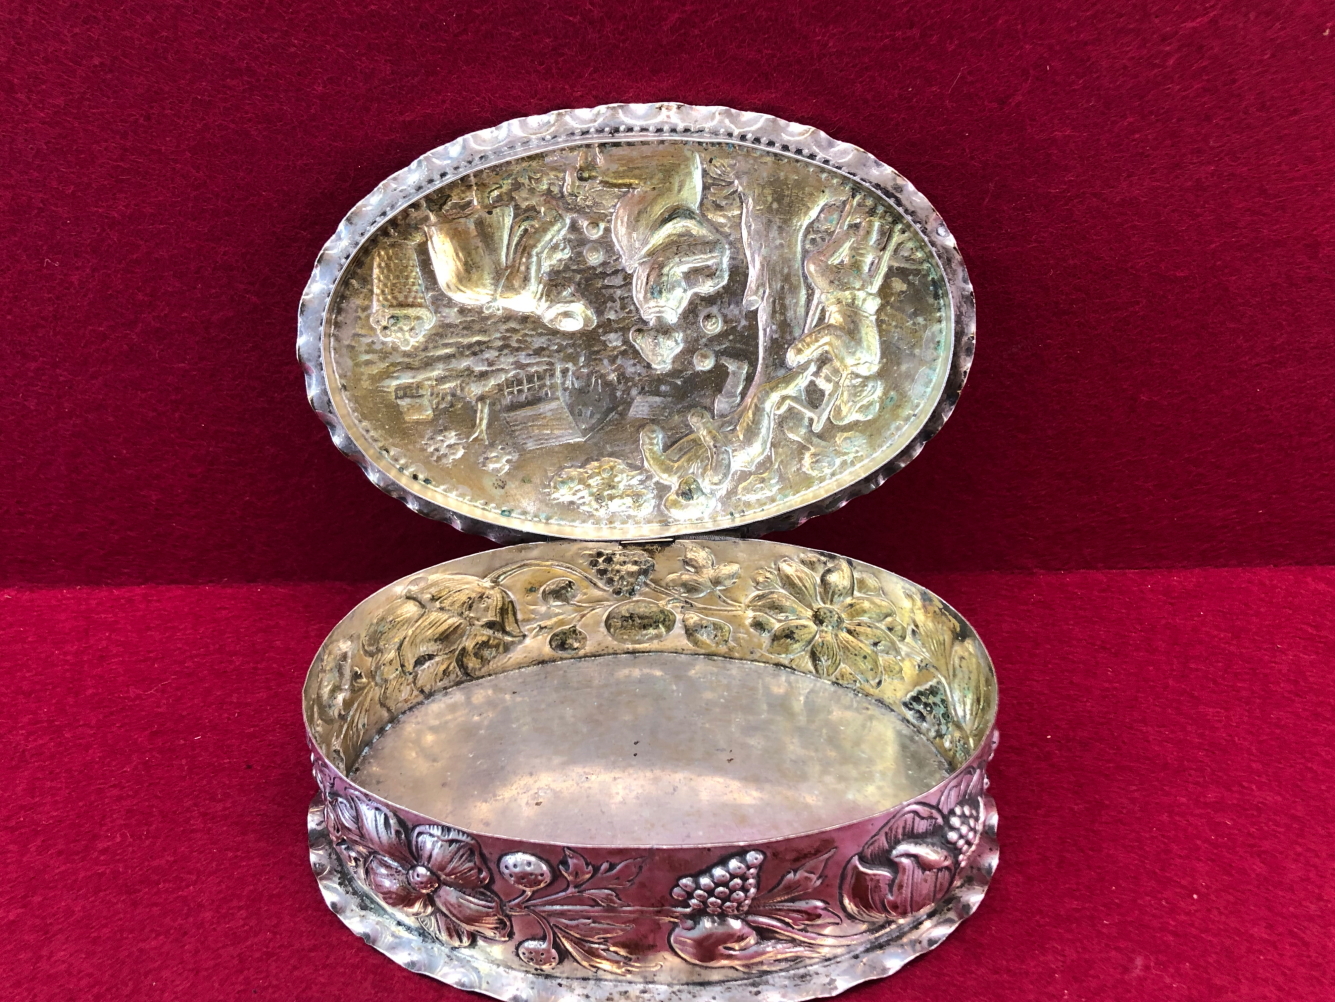 A GERMAN 800 SILVER OVAL BOX, THE HINGED LID EMBOSSED WITH AN APPLE HARVESTING SCENE, THE SIDES WITH - Image 3 of 3